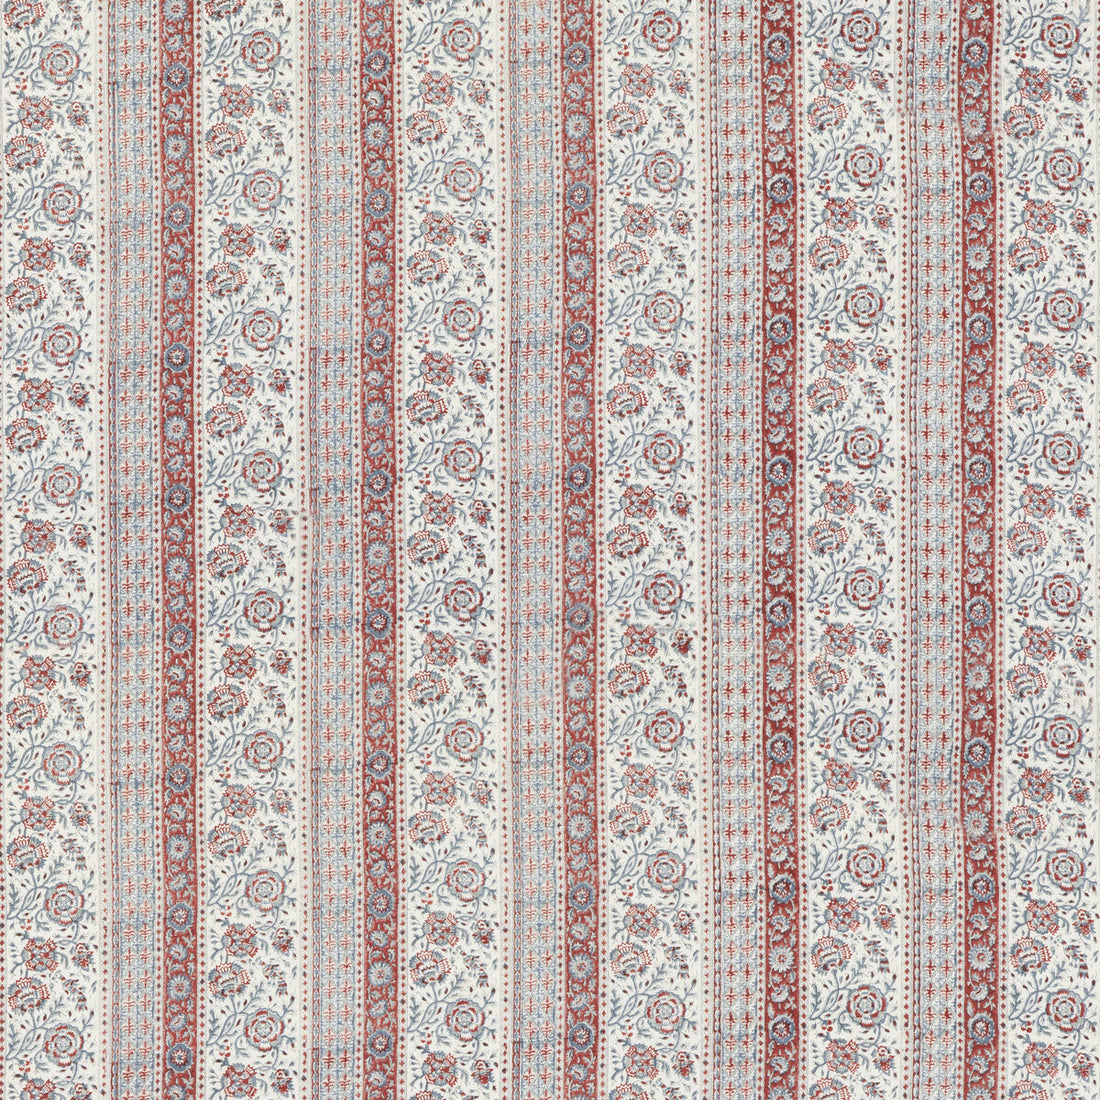 Tillington fabric in red/ blue color - pattern BP10912.2.0 - by G P &amp; J Baker in the Portobello collection